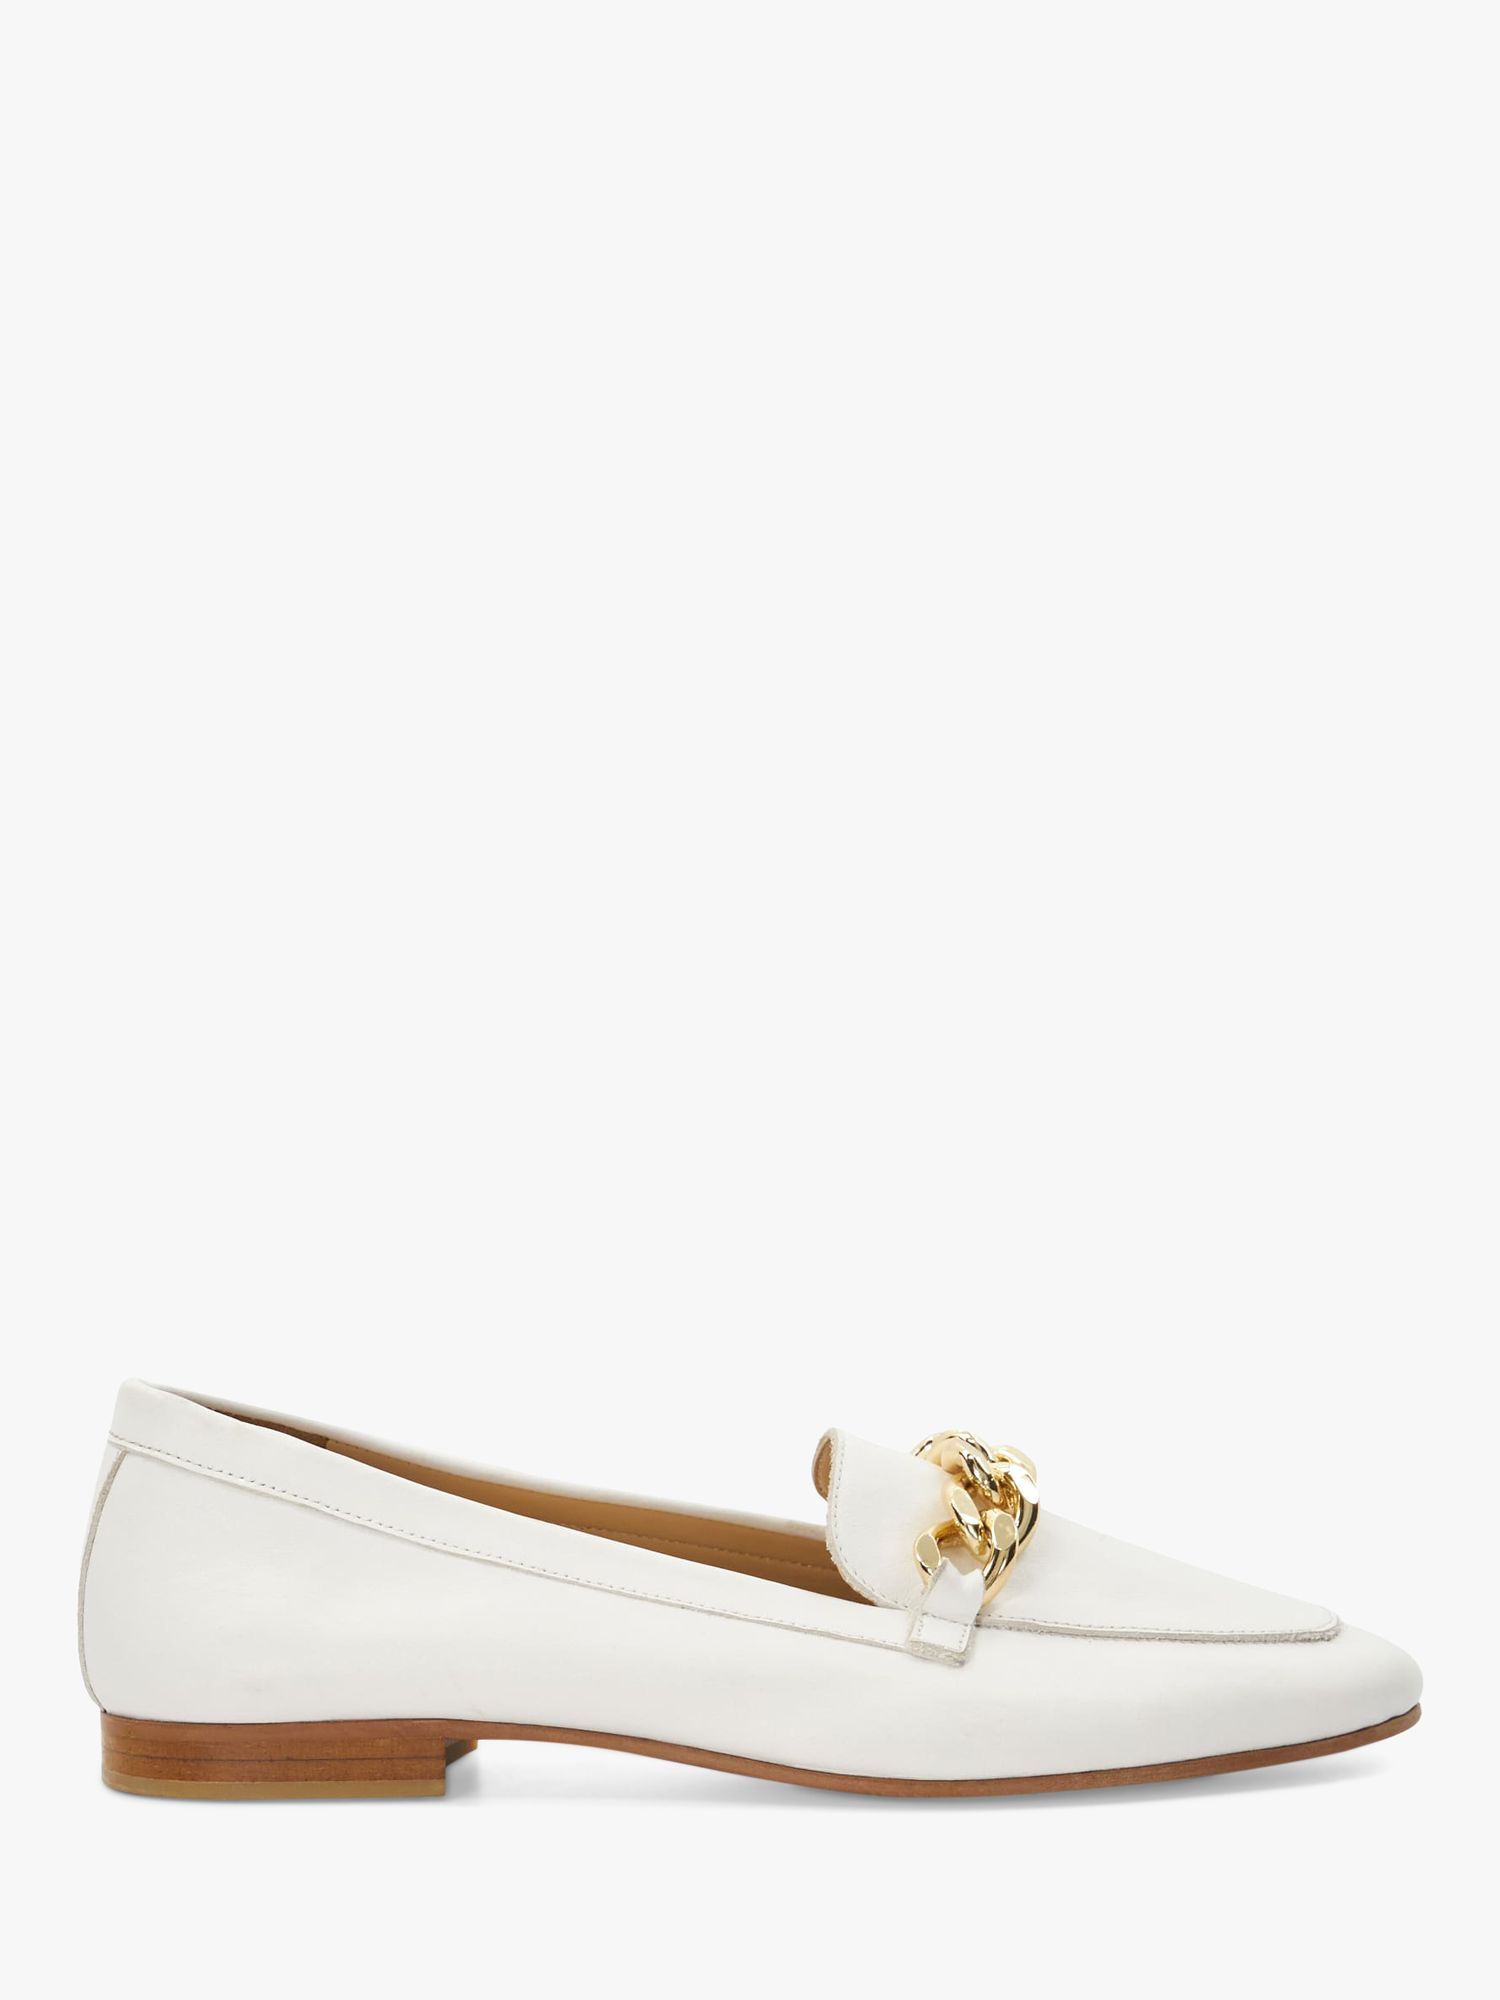 Buy Dune Goldsmith Leather Chain Trim Loafers, White Online at johnlewis.com